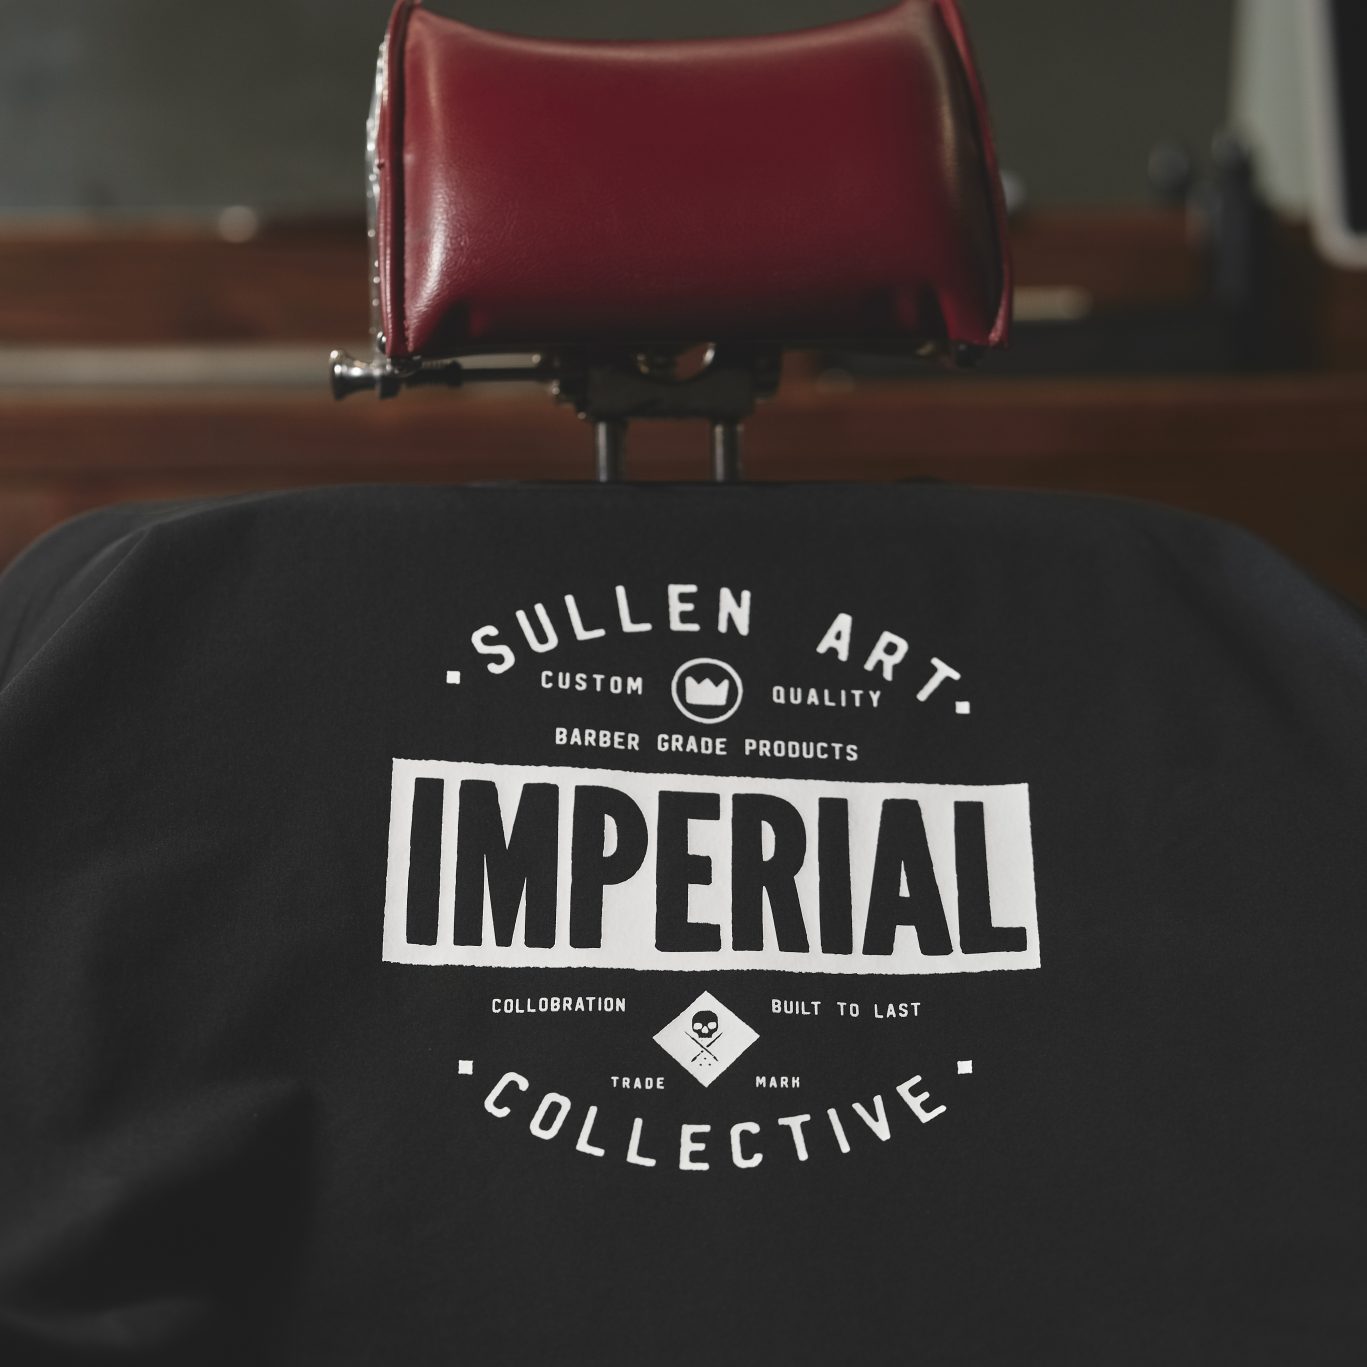 Imperial Barber Cape - Limited Edition